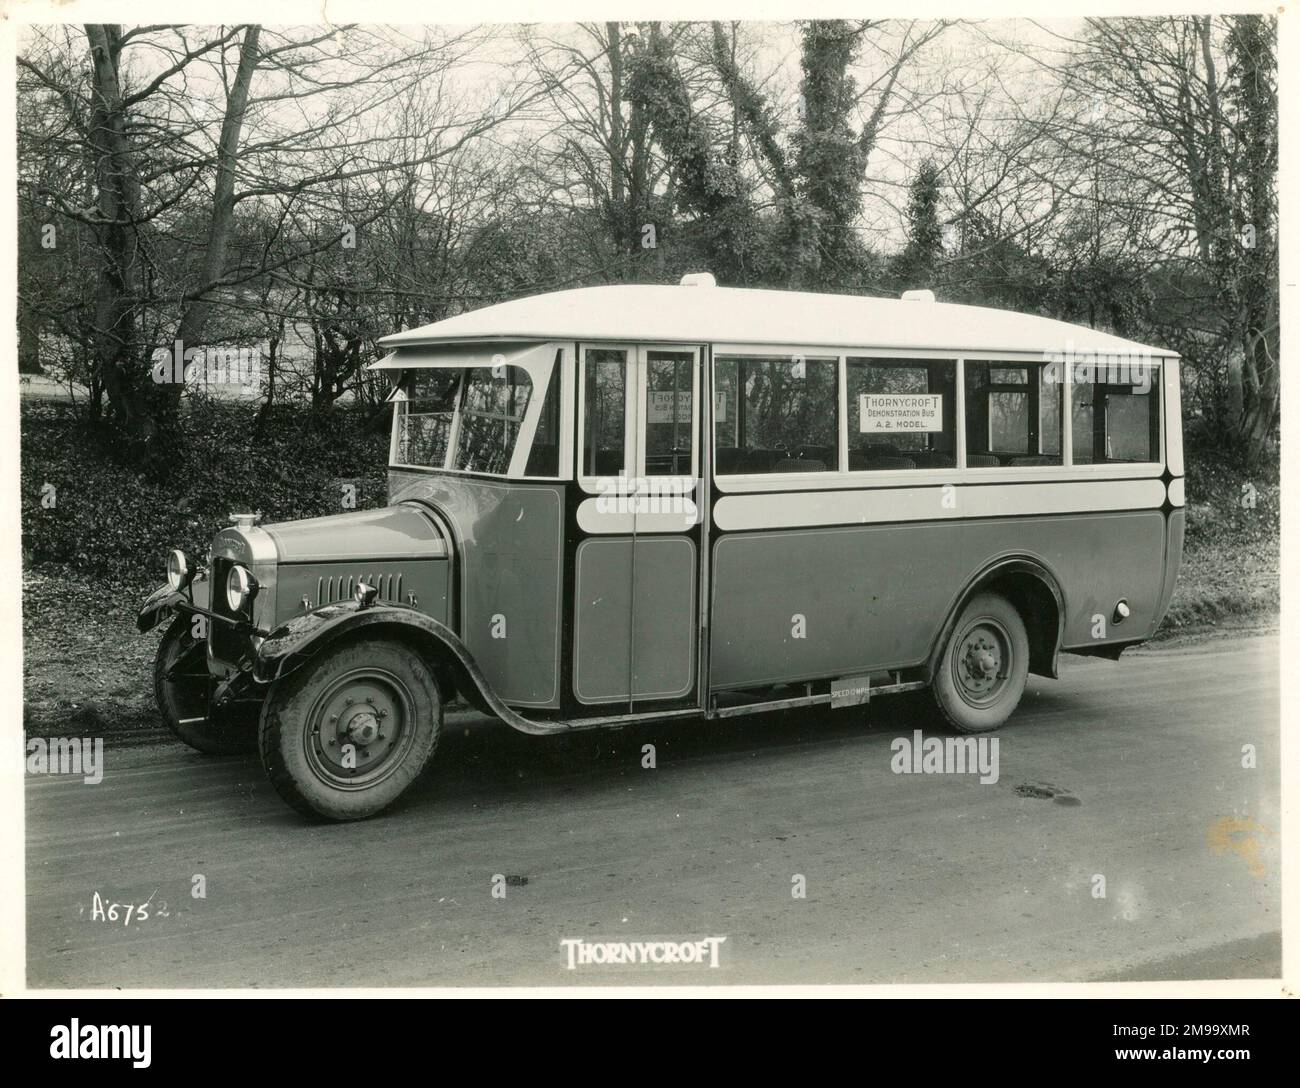 Thornycroft Demonstrationsbus, A2 Elysian Northern Counties. Stockfoto